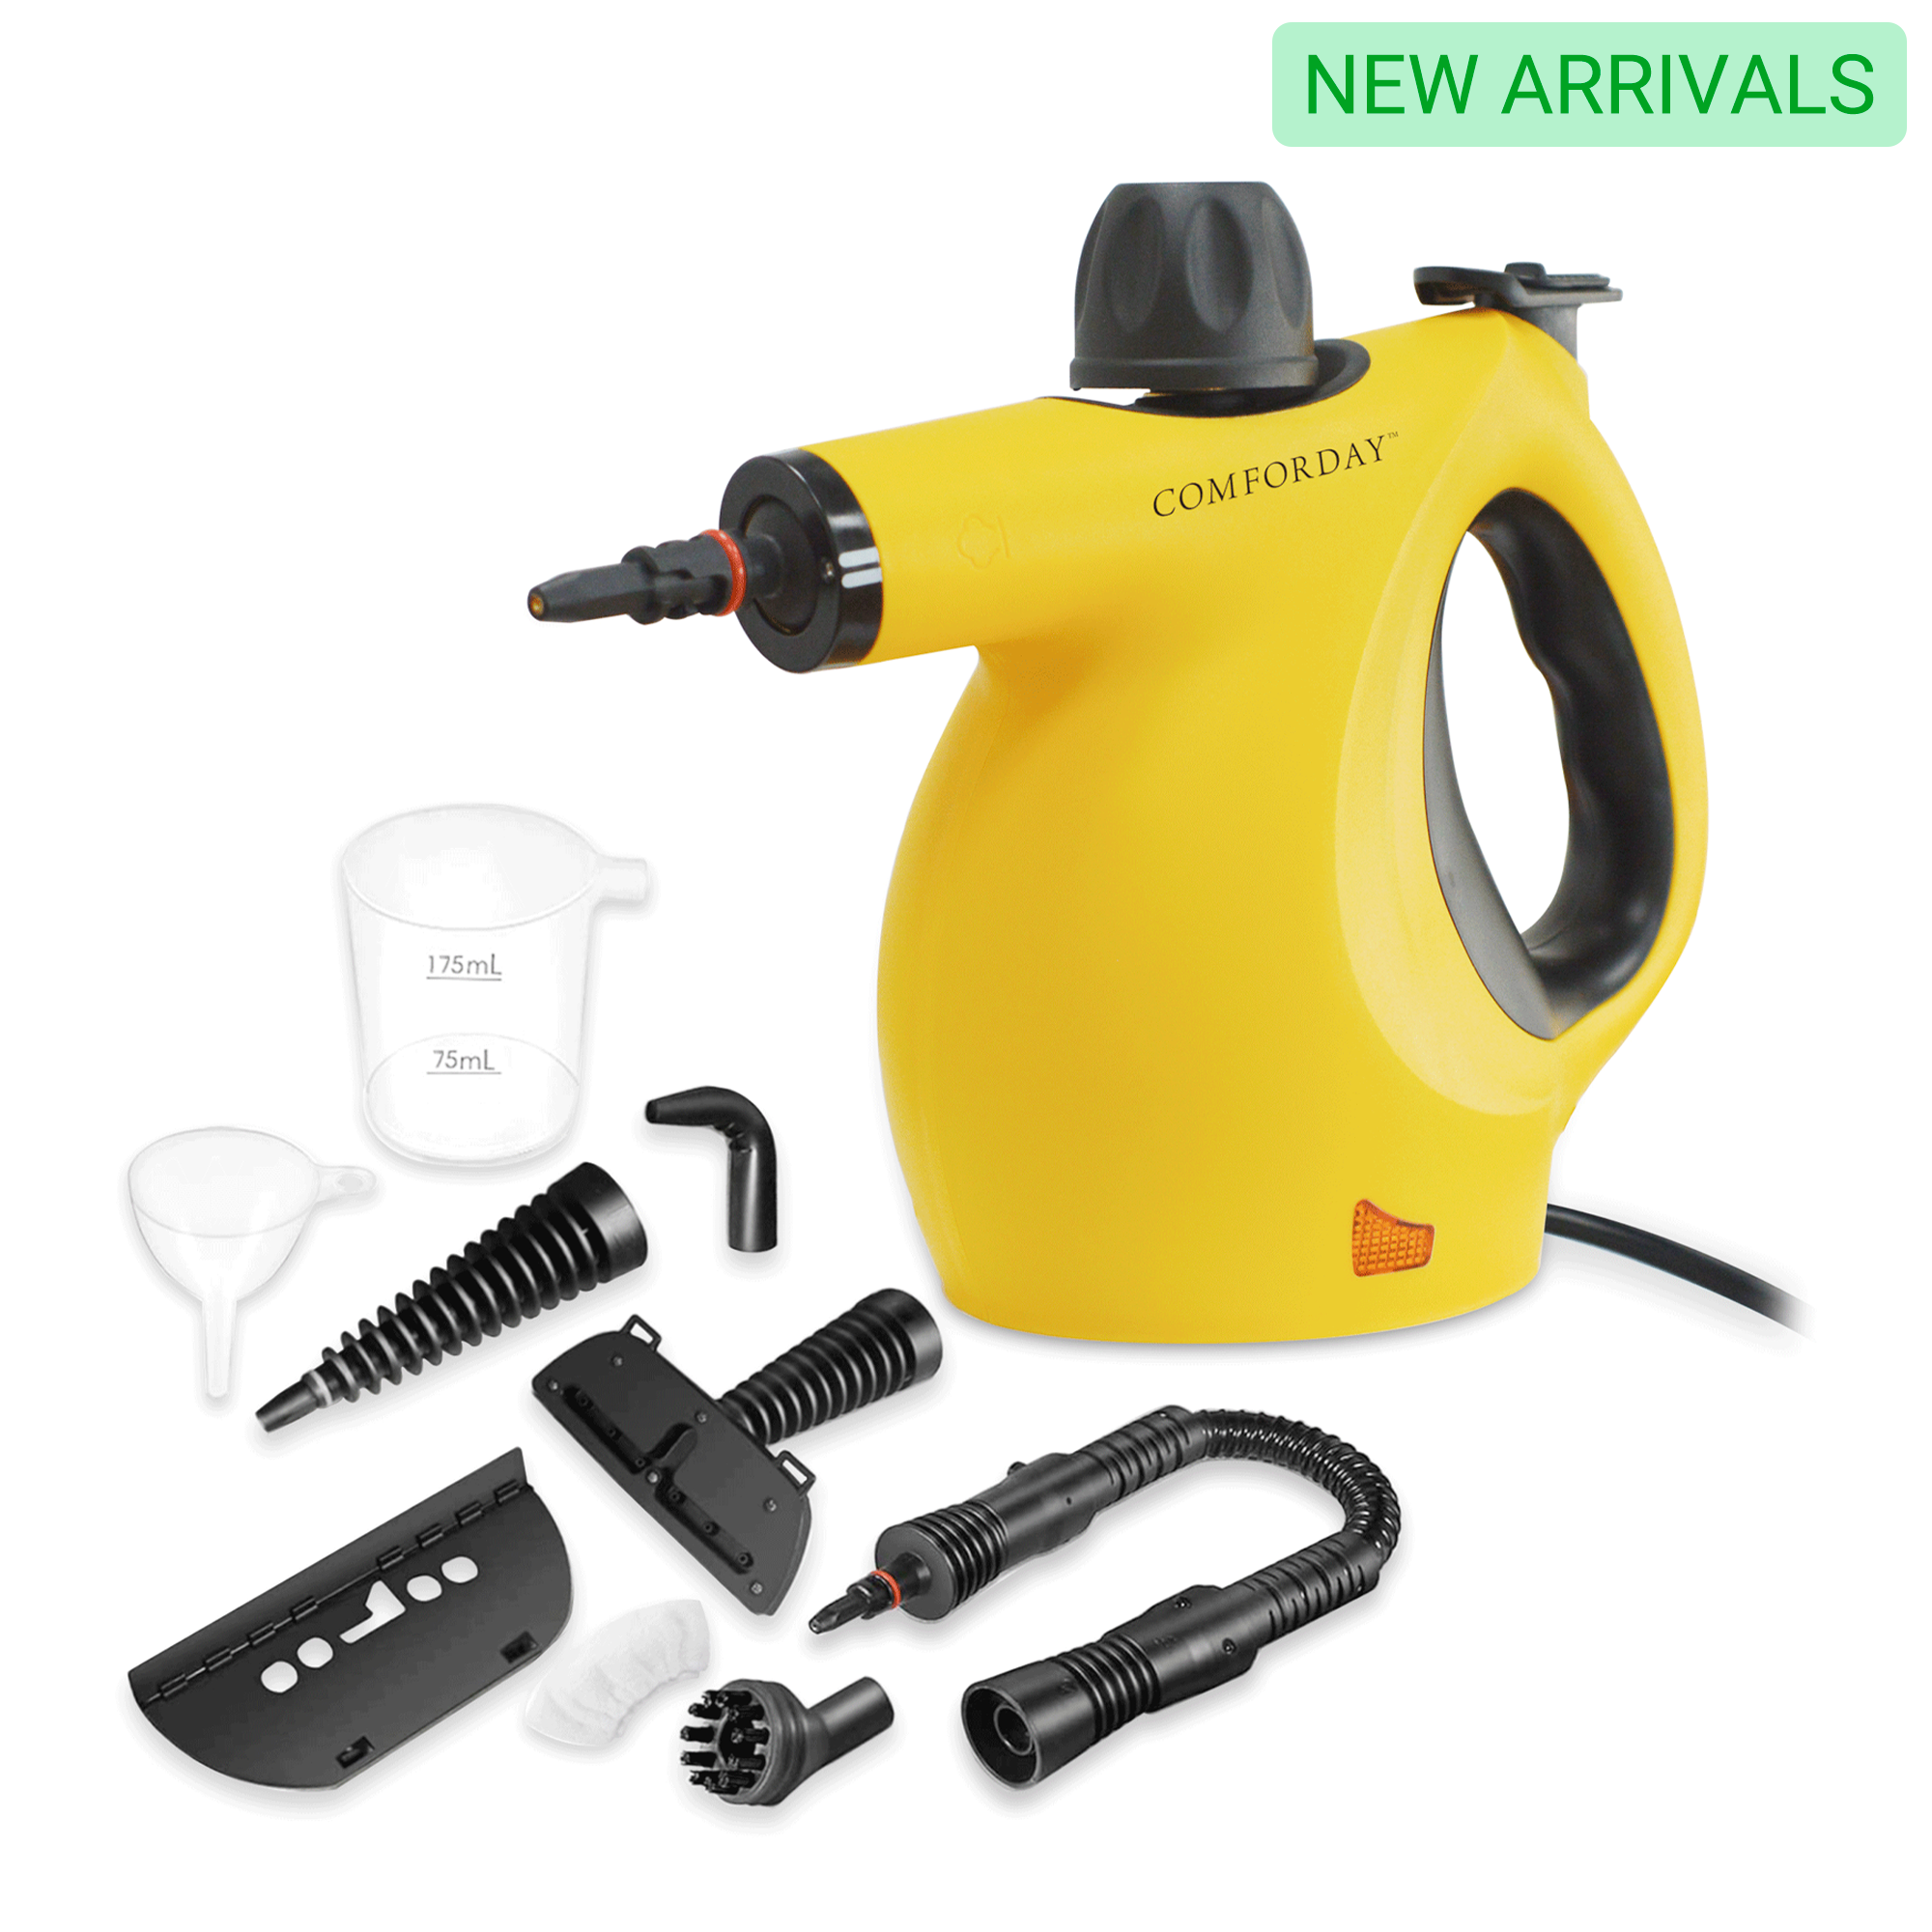 Comforday Multi-Purpose Handheld Pressurized Steam Cleaner with 9-Piece Accessories for Stain Removal, Steamer, Carpets, Curtains, Car Seats, Kitchen Surface & Much More (Yellow Black)